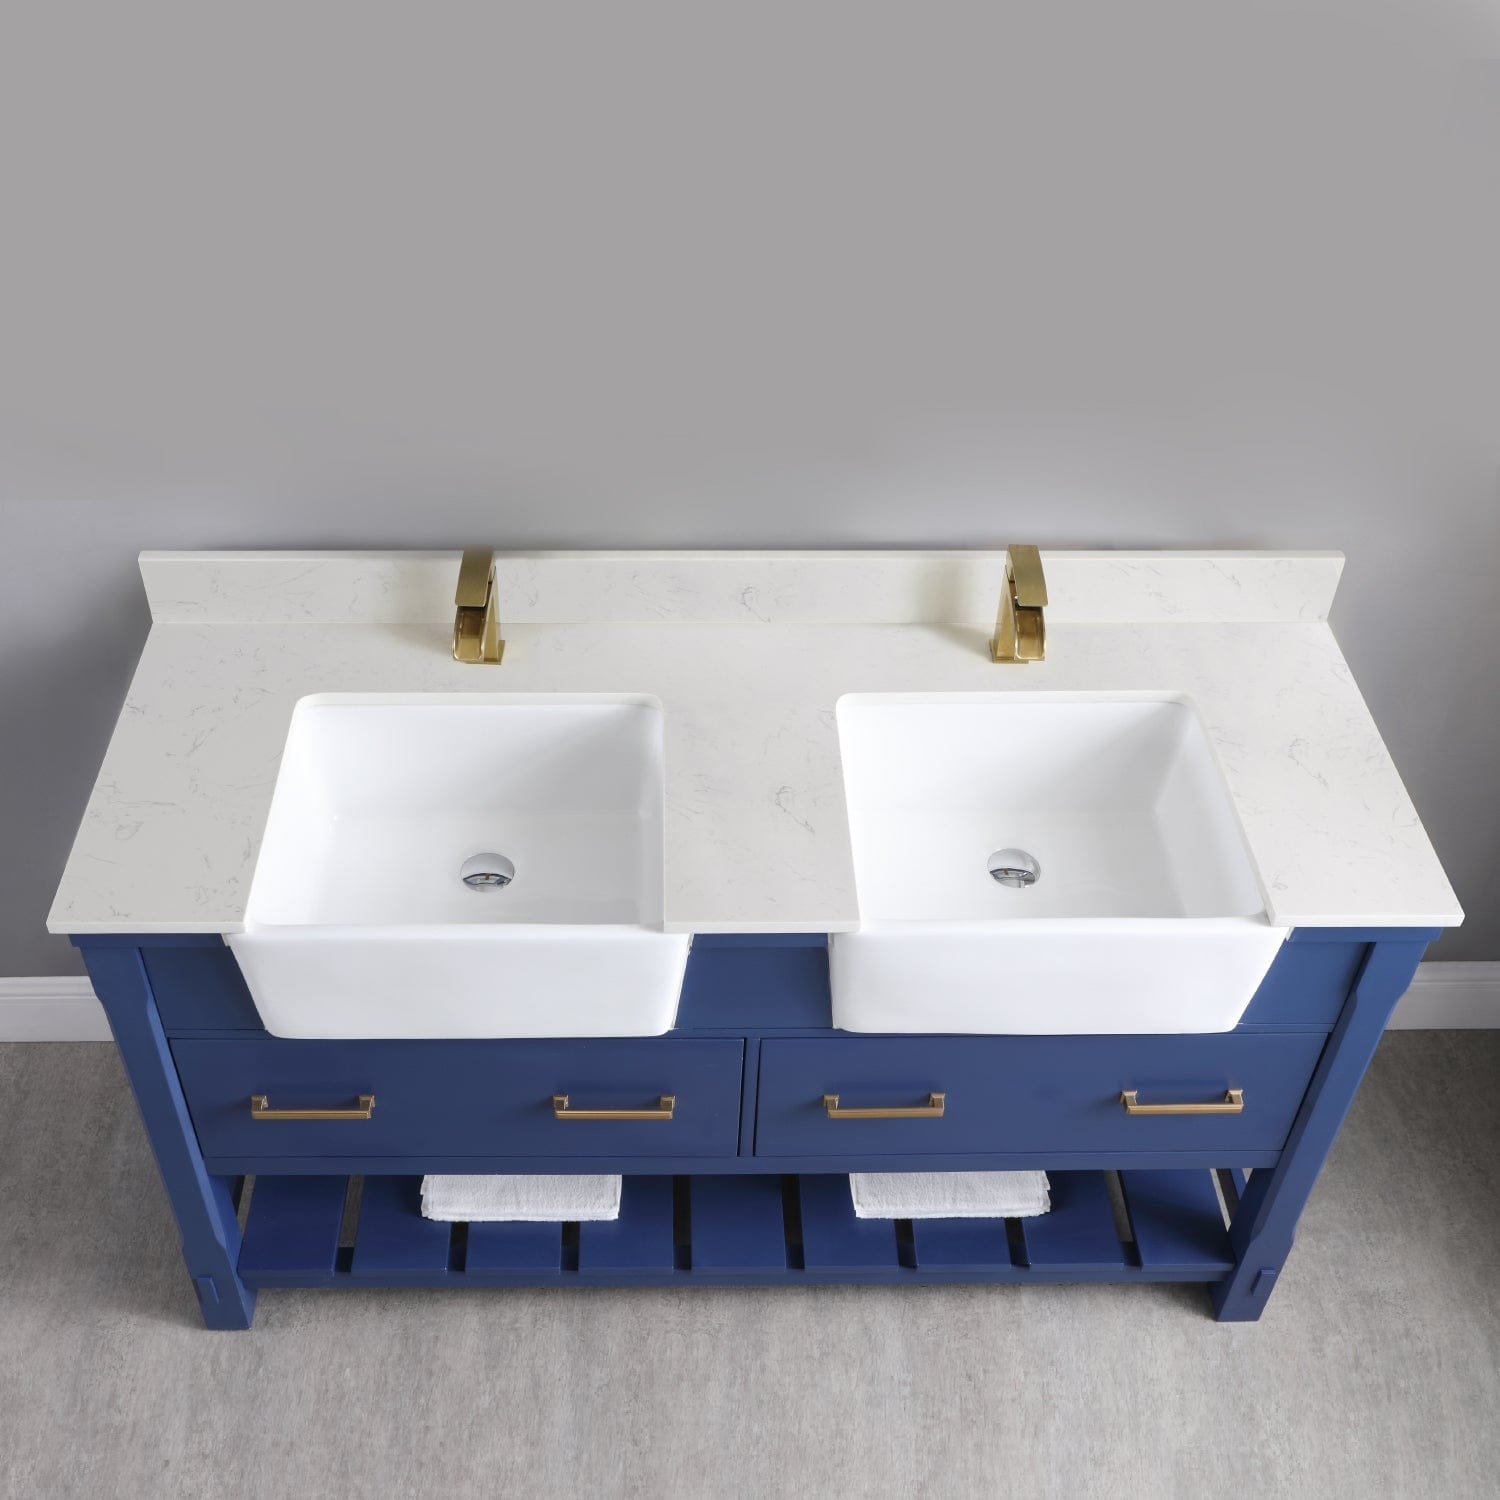 Altair Georgia 60" Double Bathroom Vanity Set in Jewelry Blue and Composite Carrara White Stone Top with White Farmhouse Basin without Mirror 537060-JB-AW-NM - Molaix631112970648Vanity537060-JB-AW-NM